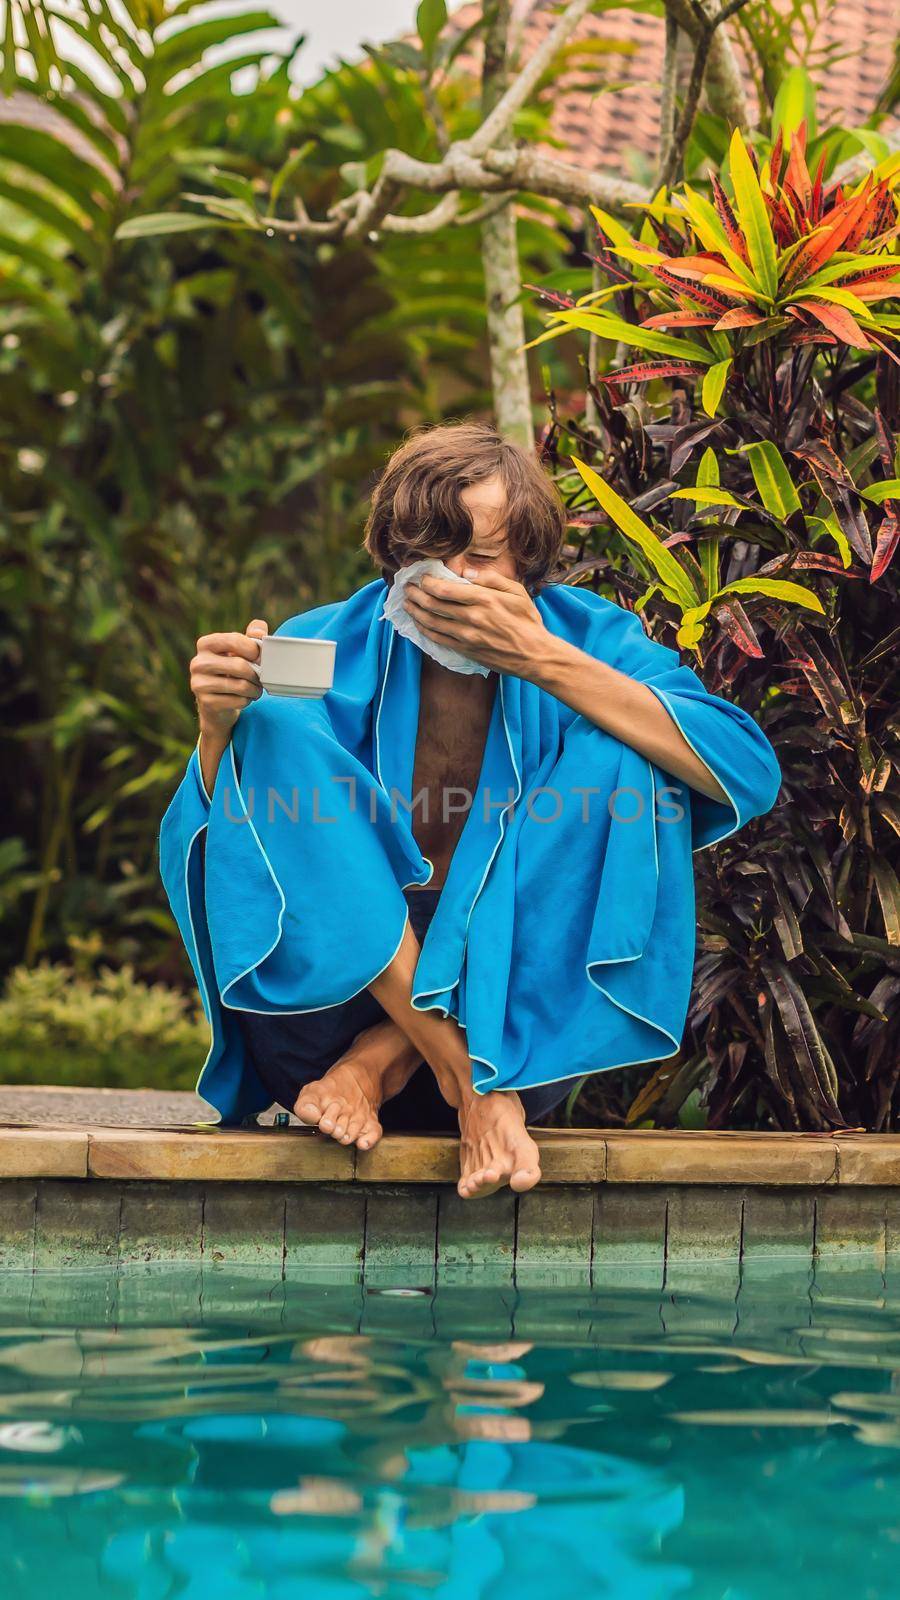 Sick man traveler. The man caught a cold on vacation, sits sad at the pool drinking tea and blows his nose into a napkin. His son is healthy and swimming in the pool. Travel insurance concept. VERTICAL FORMAT for Instagram mobile story or stories size. Mobile wallpaper